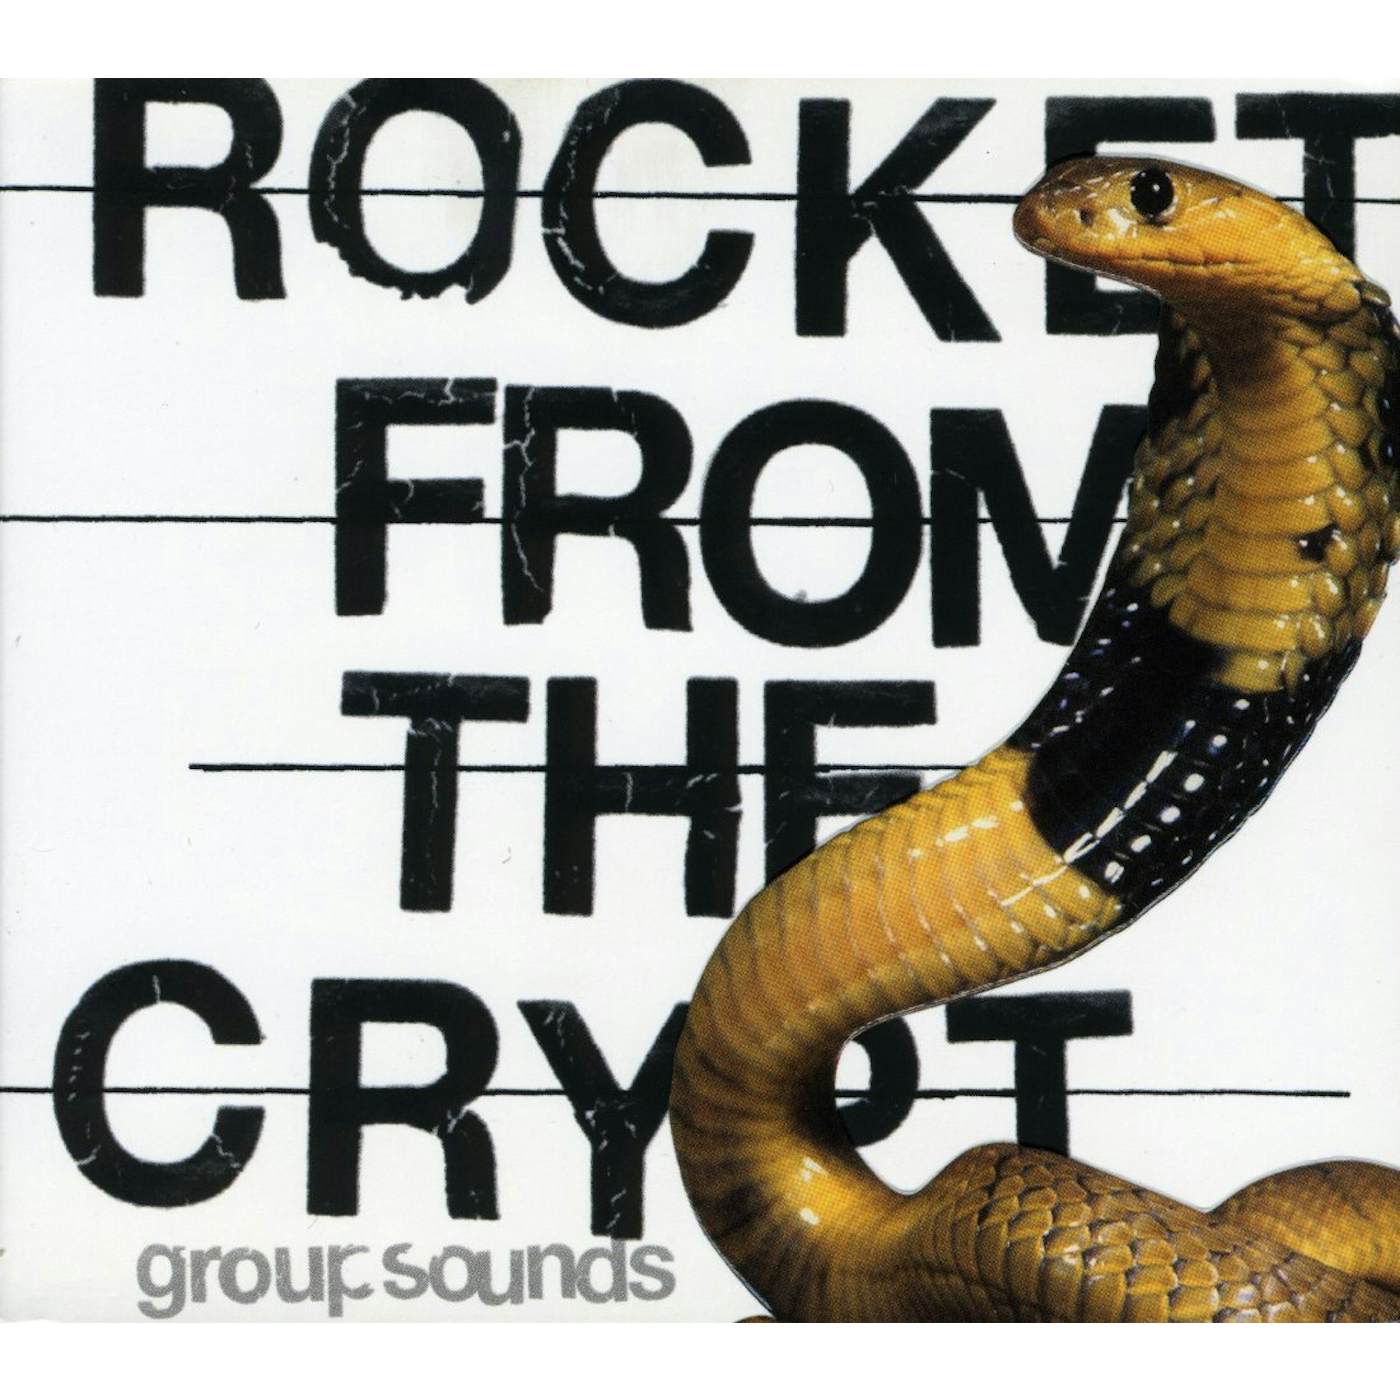 Rocket From The Crypt GROUP SOUNDS CD